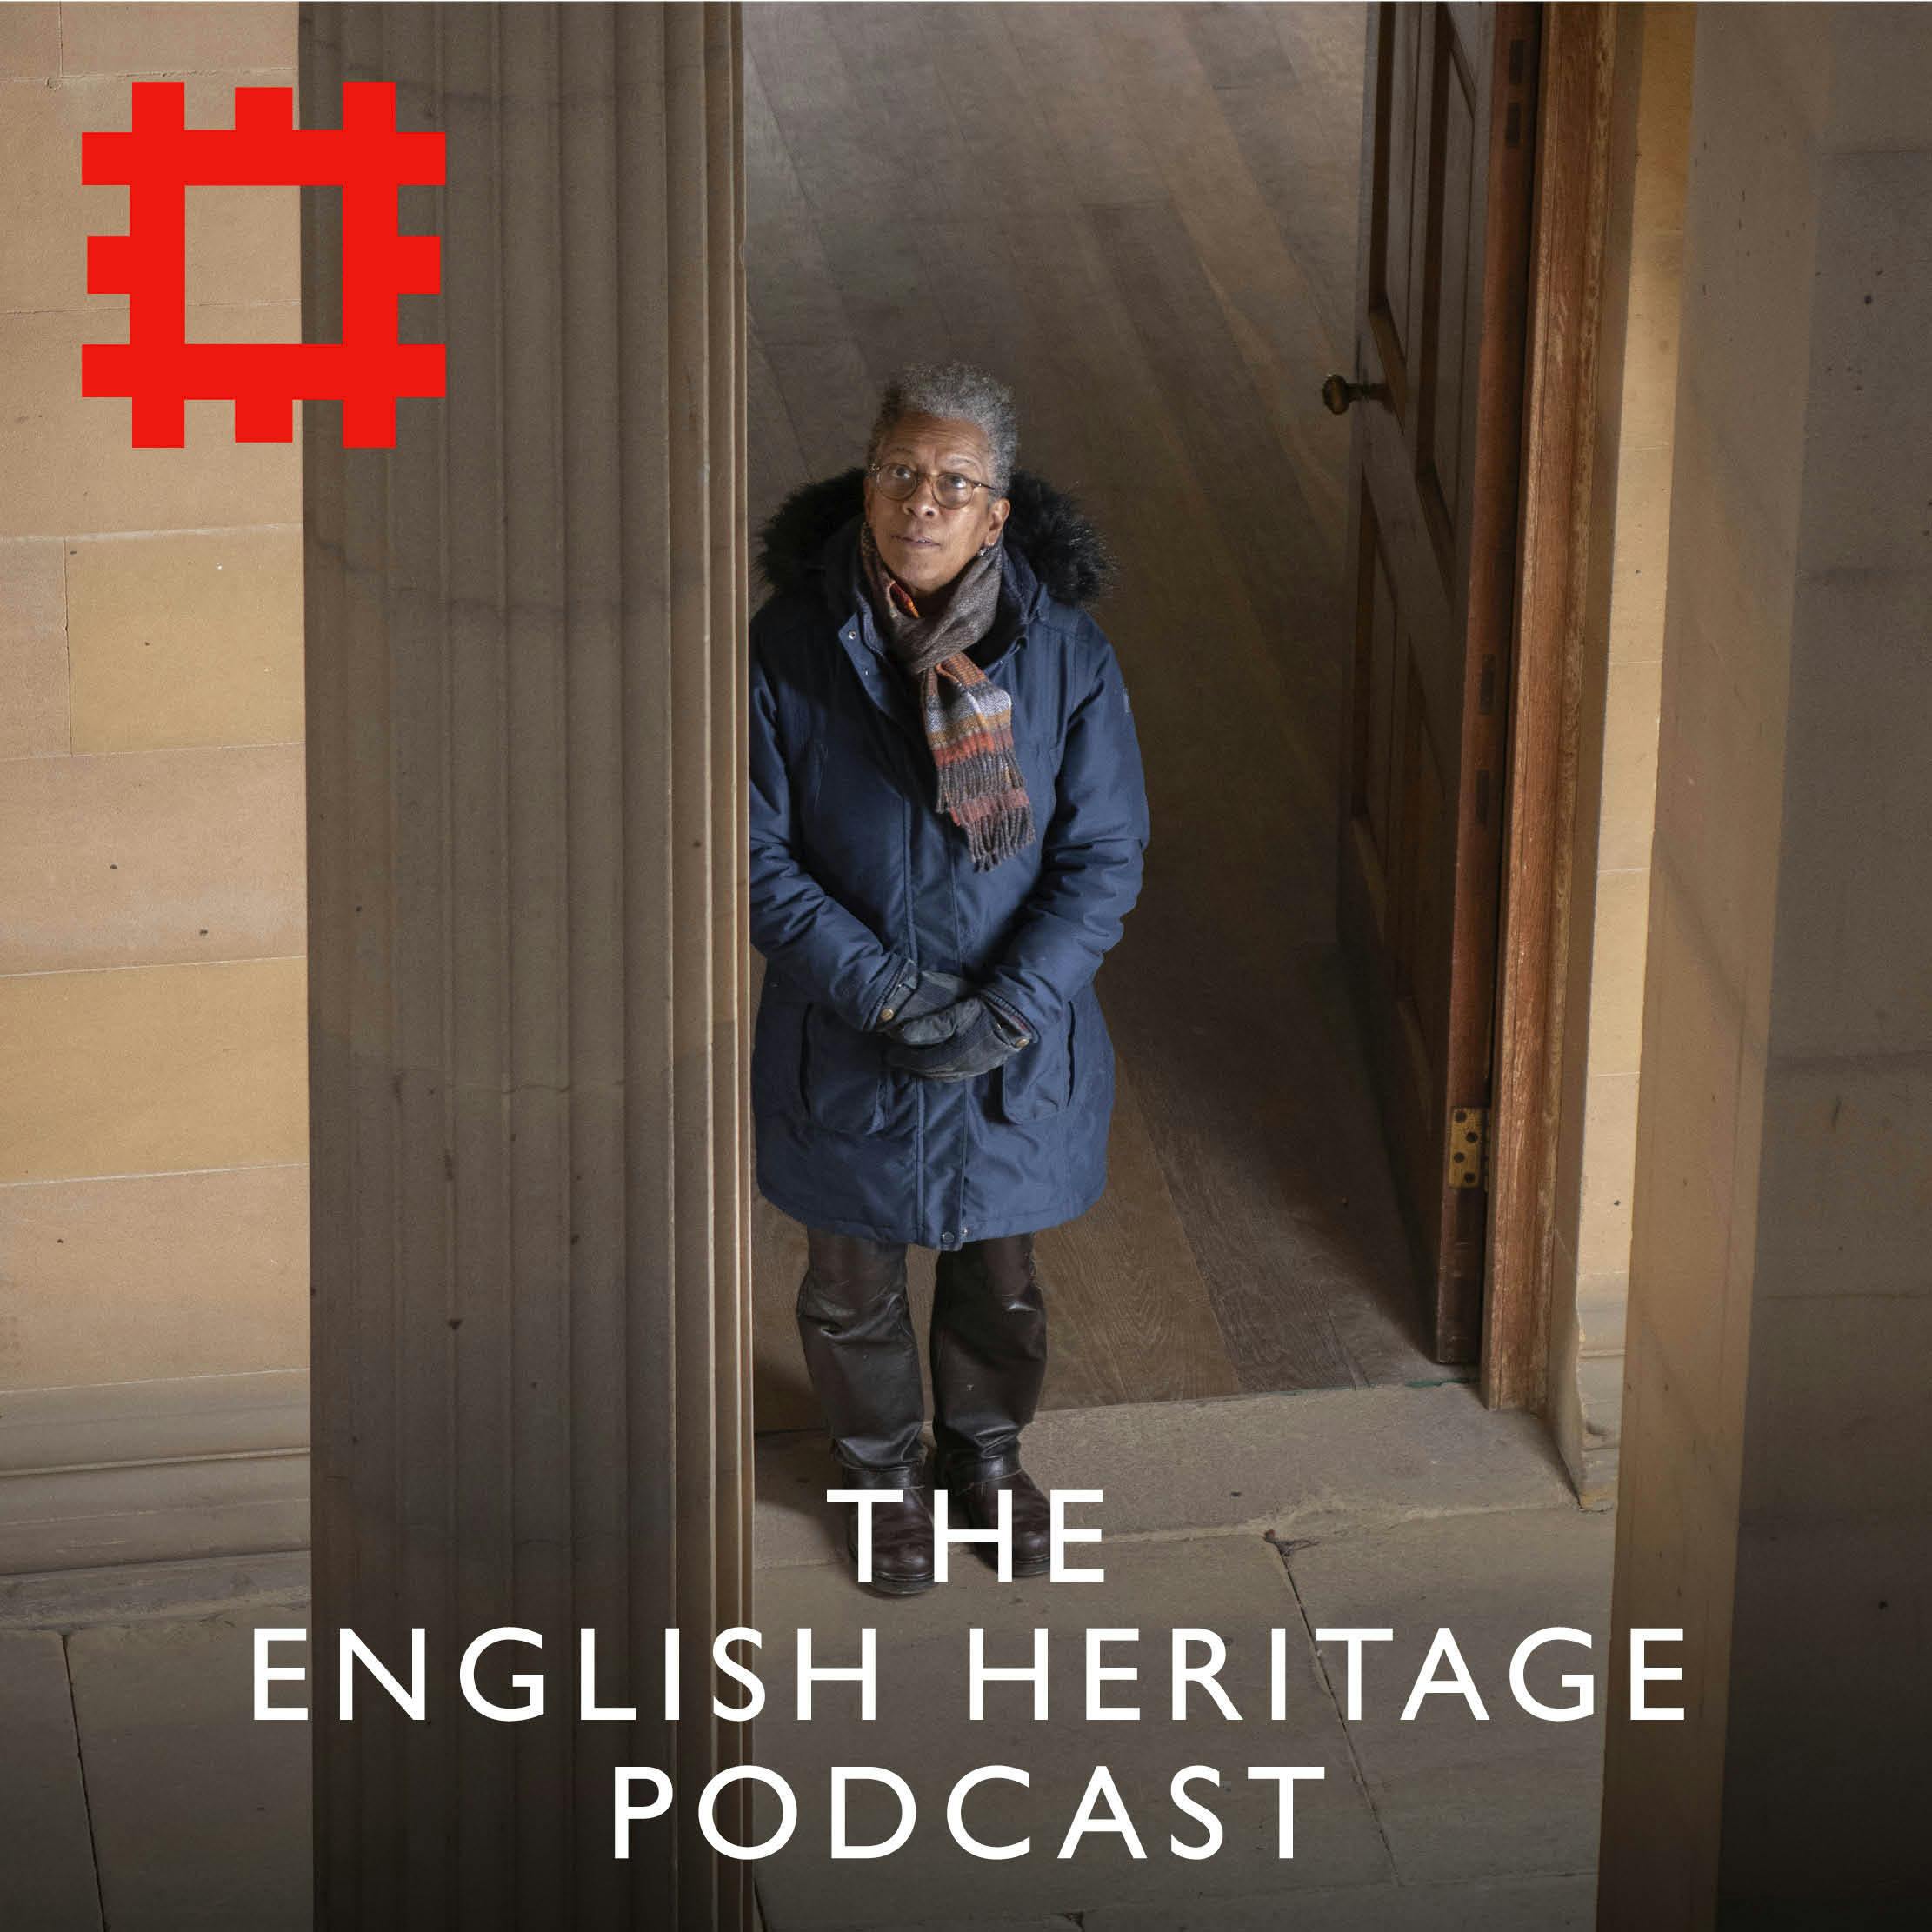 Episode 258 - Seeing Belsay Hall in a new light with artist Ingrid Pollard